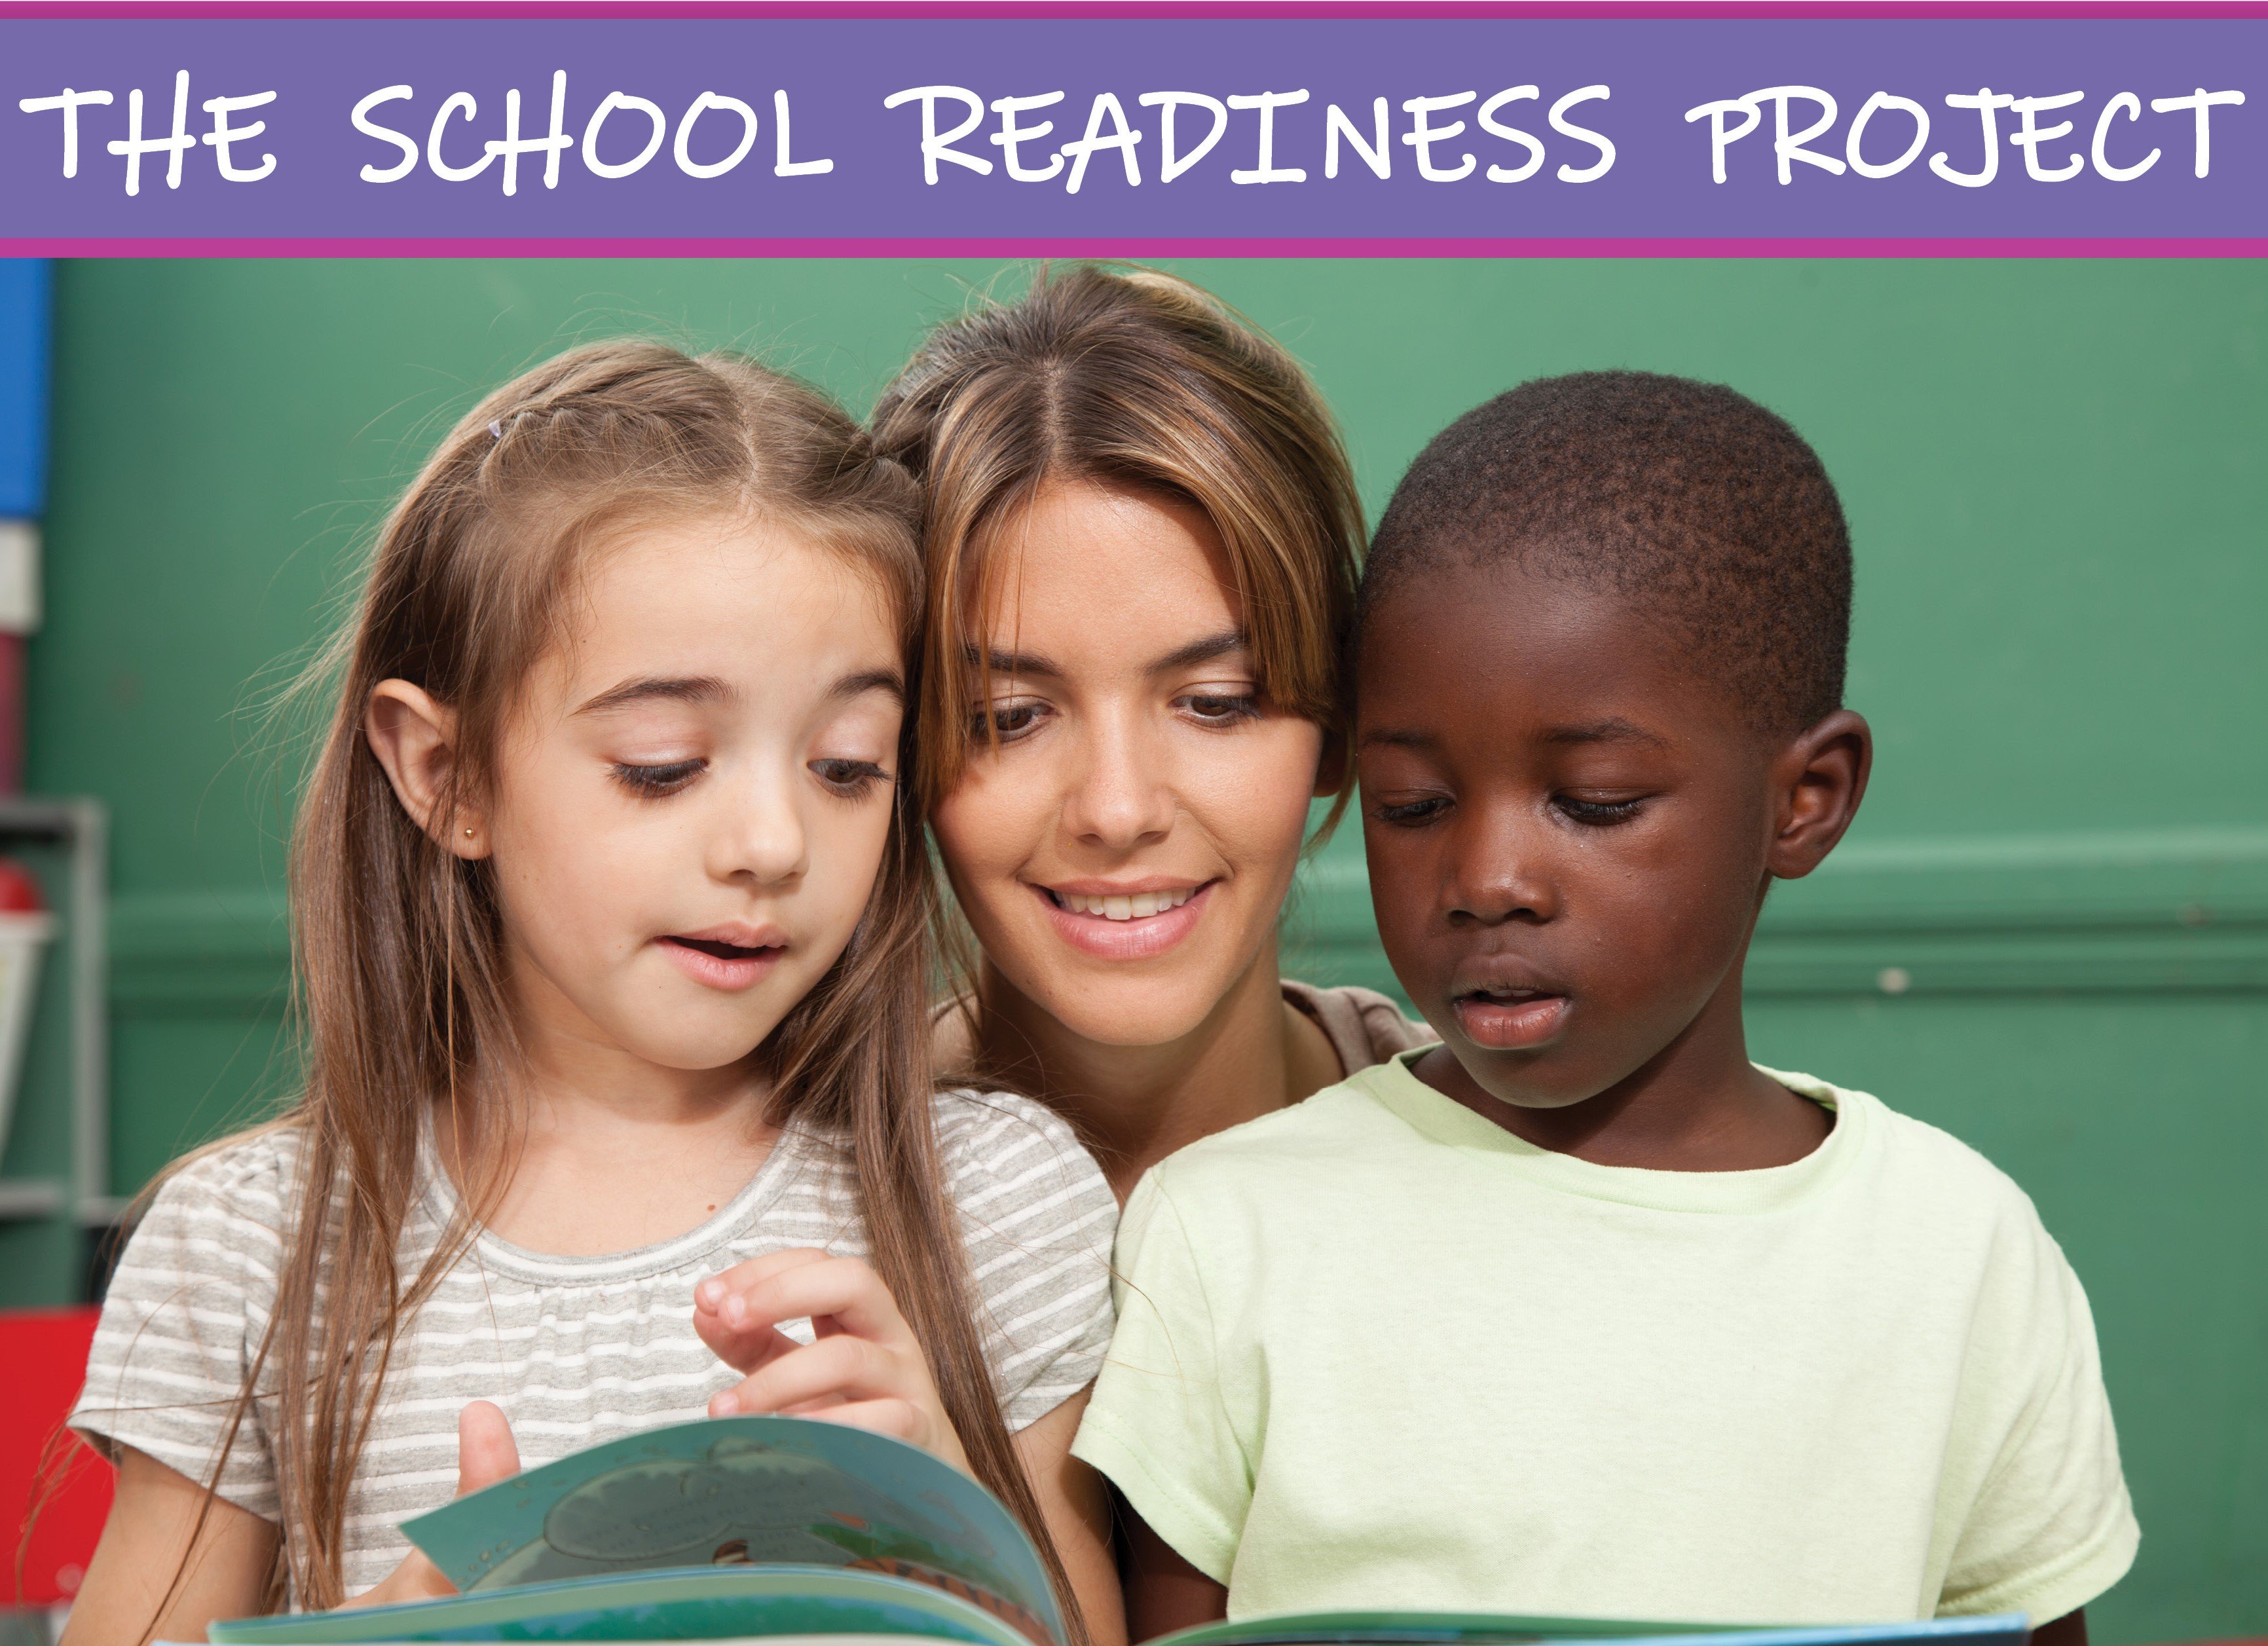 School Readiness title and image